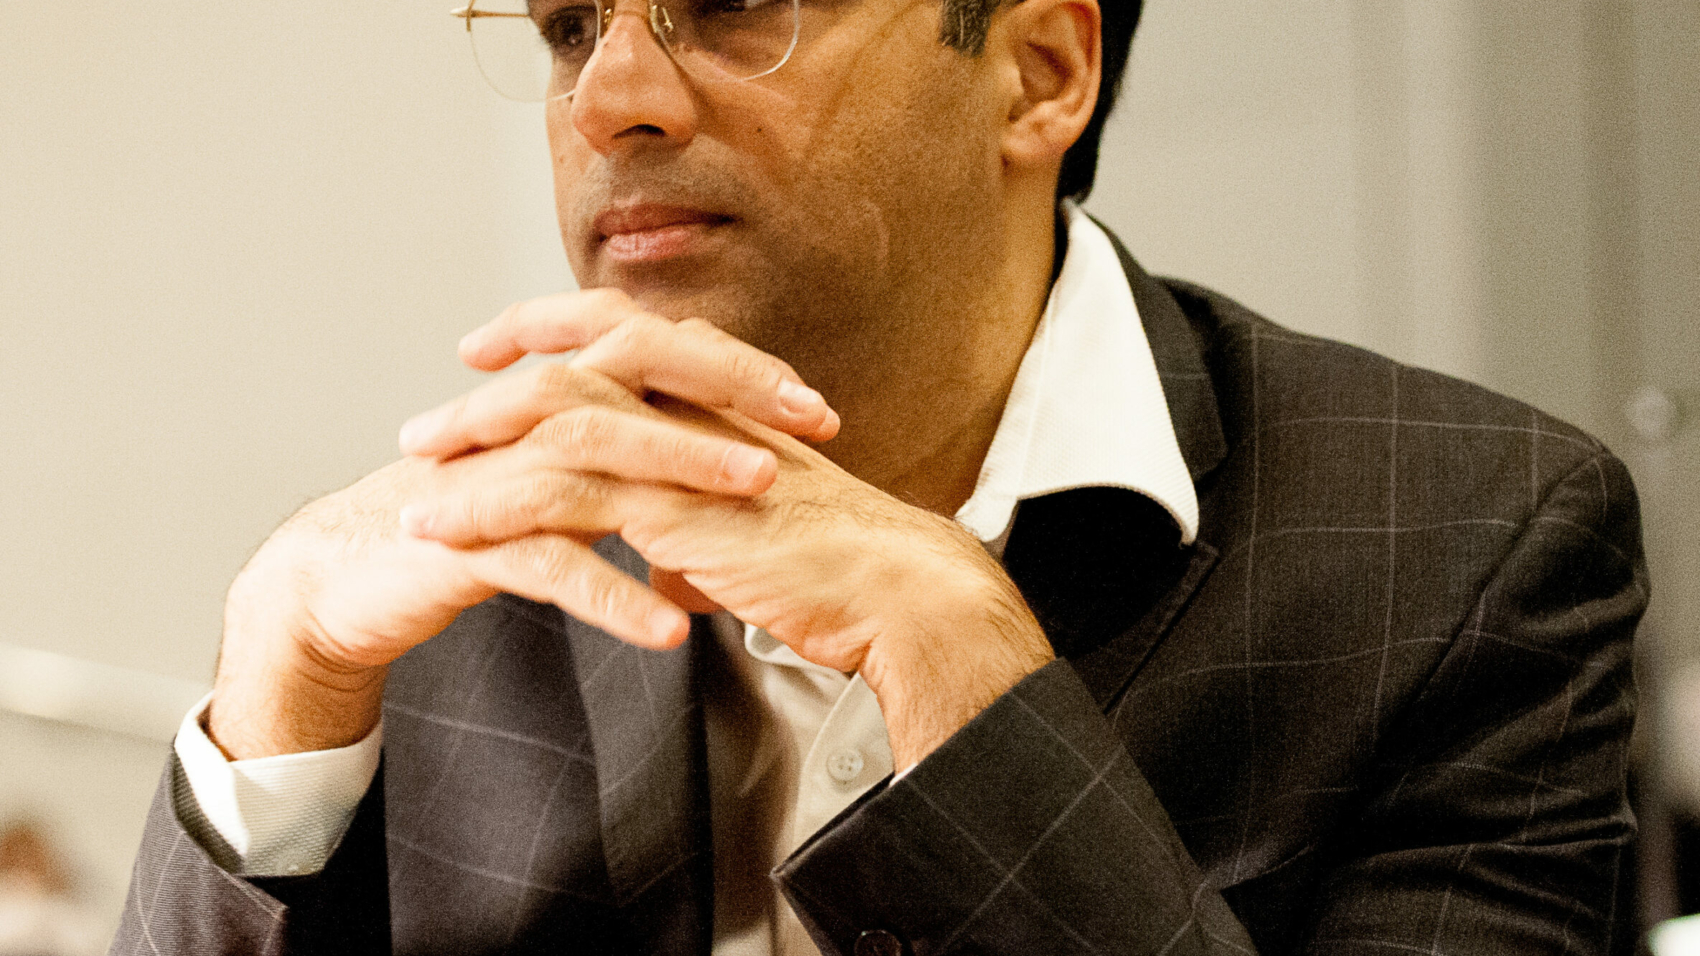 Viswanathan_Anand_2016_cropped-1